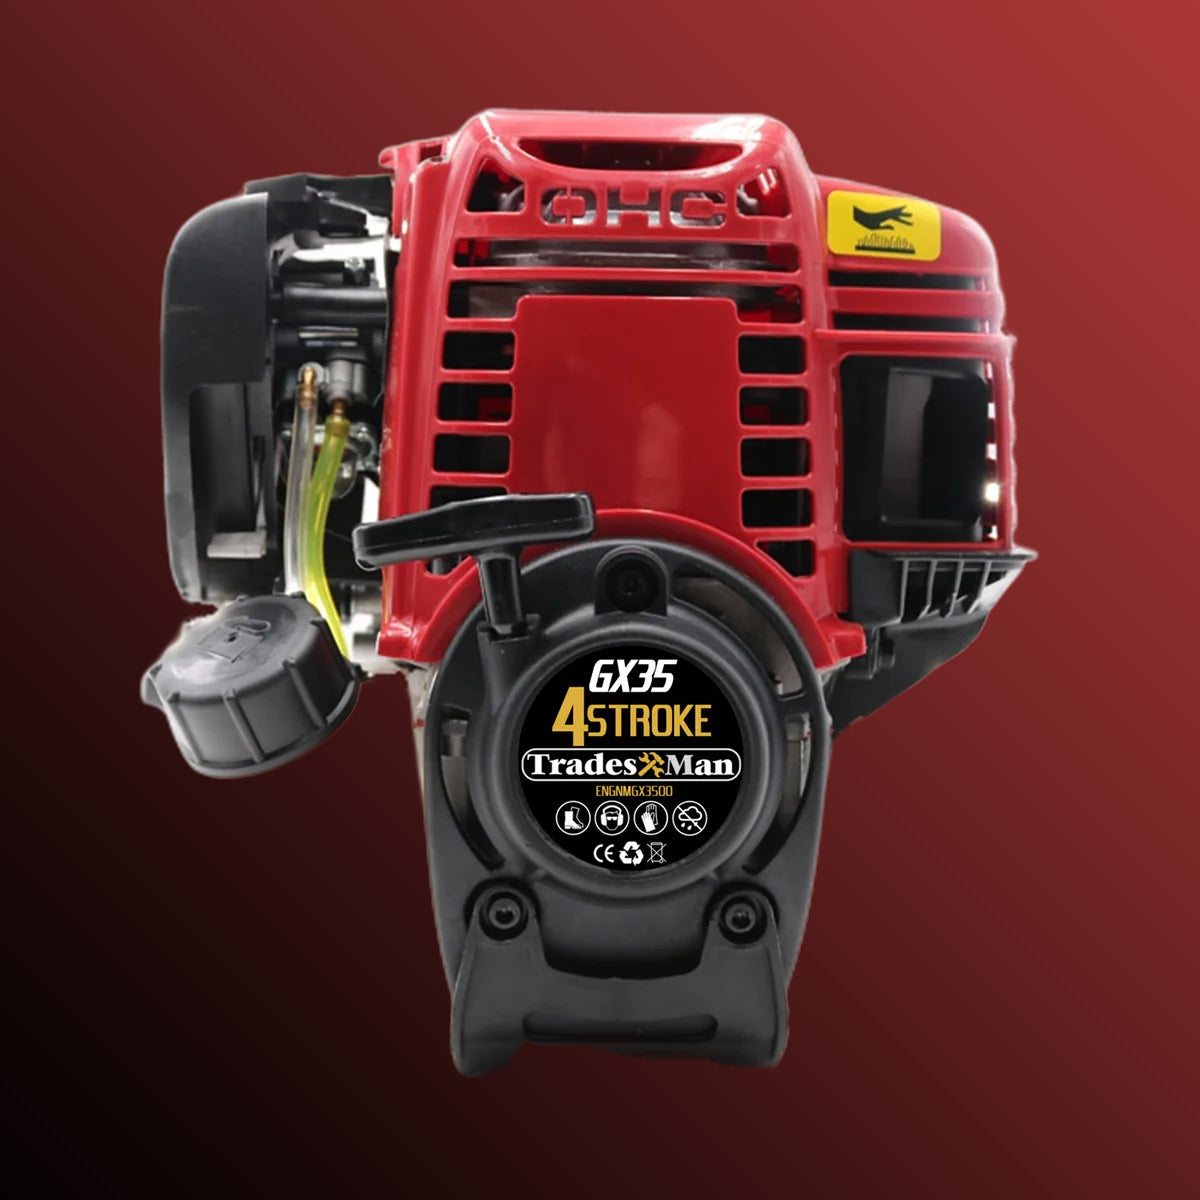 The Rise of 4-Stroke Engines in Garden Maintenance Tools